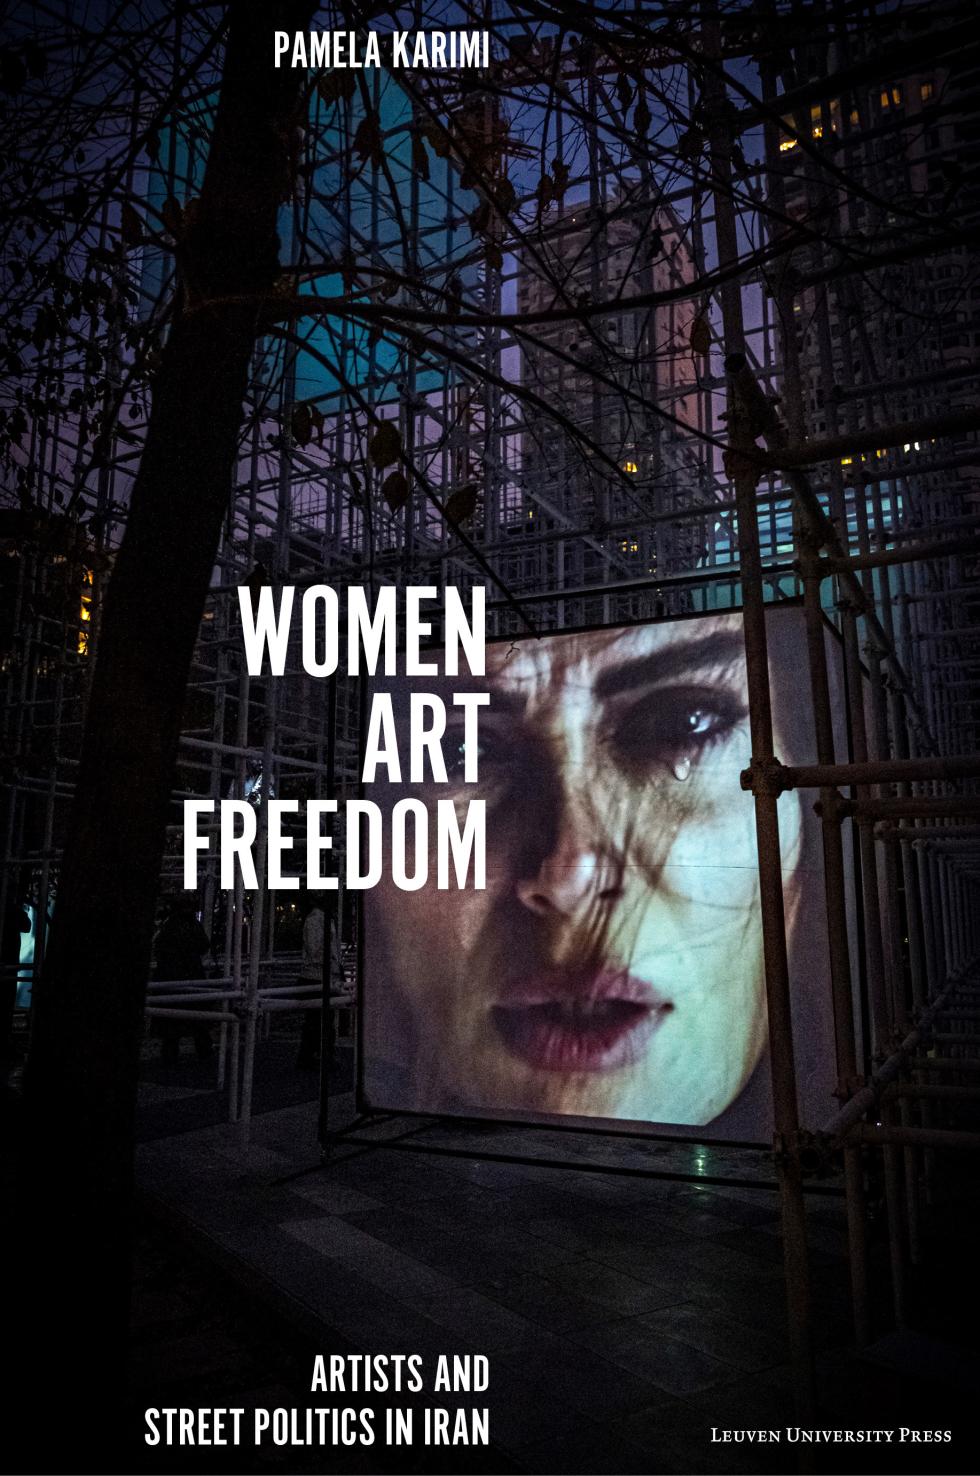 Book cover of 'Women, Art, Freedom: Artists and Street Politics in Iran' by Pamela Karimi. The cover features an image of an art installation within a room of metal scaffolding, with an image of a woman crying projected in the middle. The title and author's name are overlaid in white text.